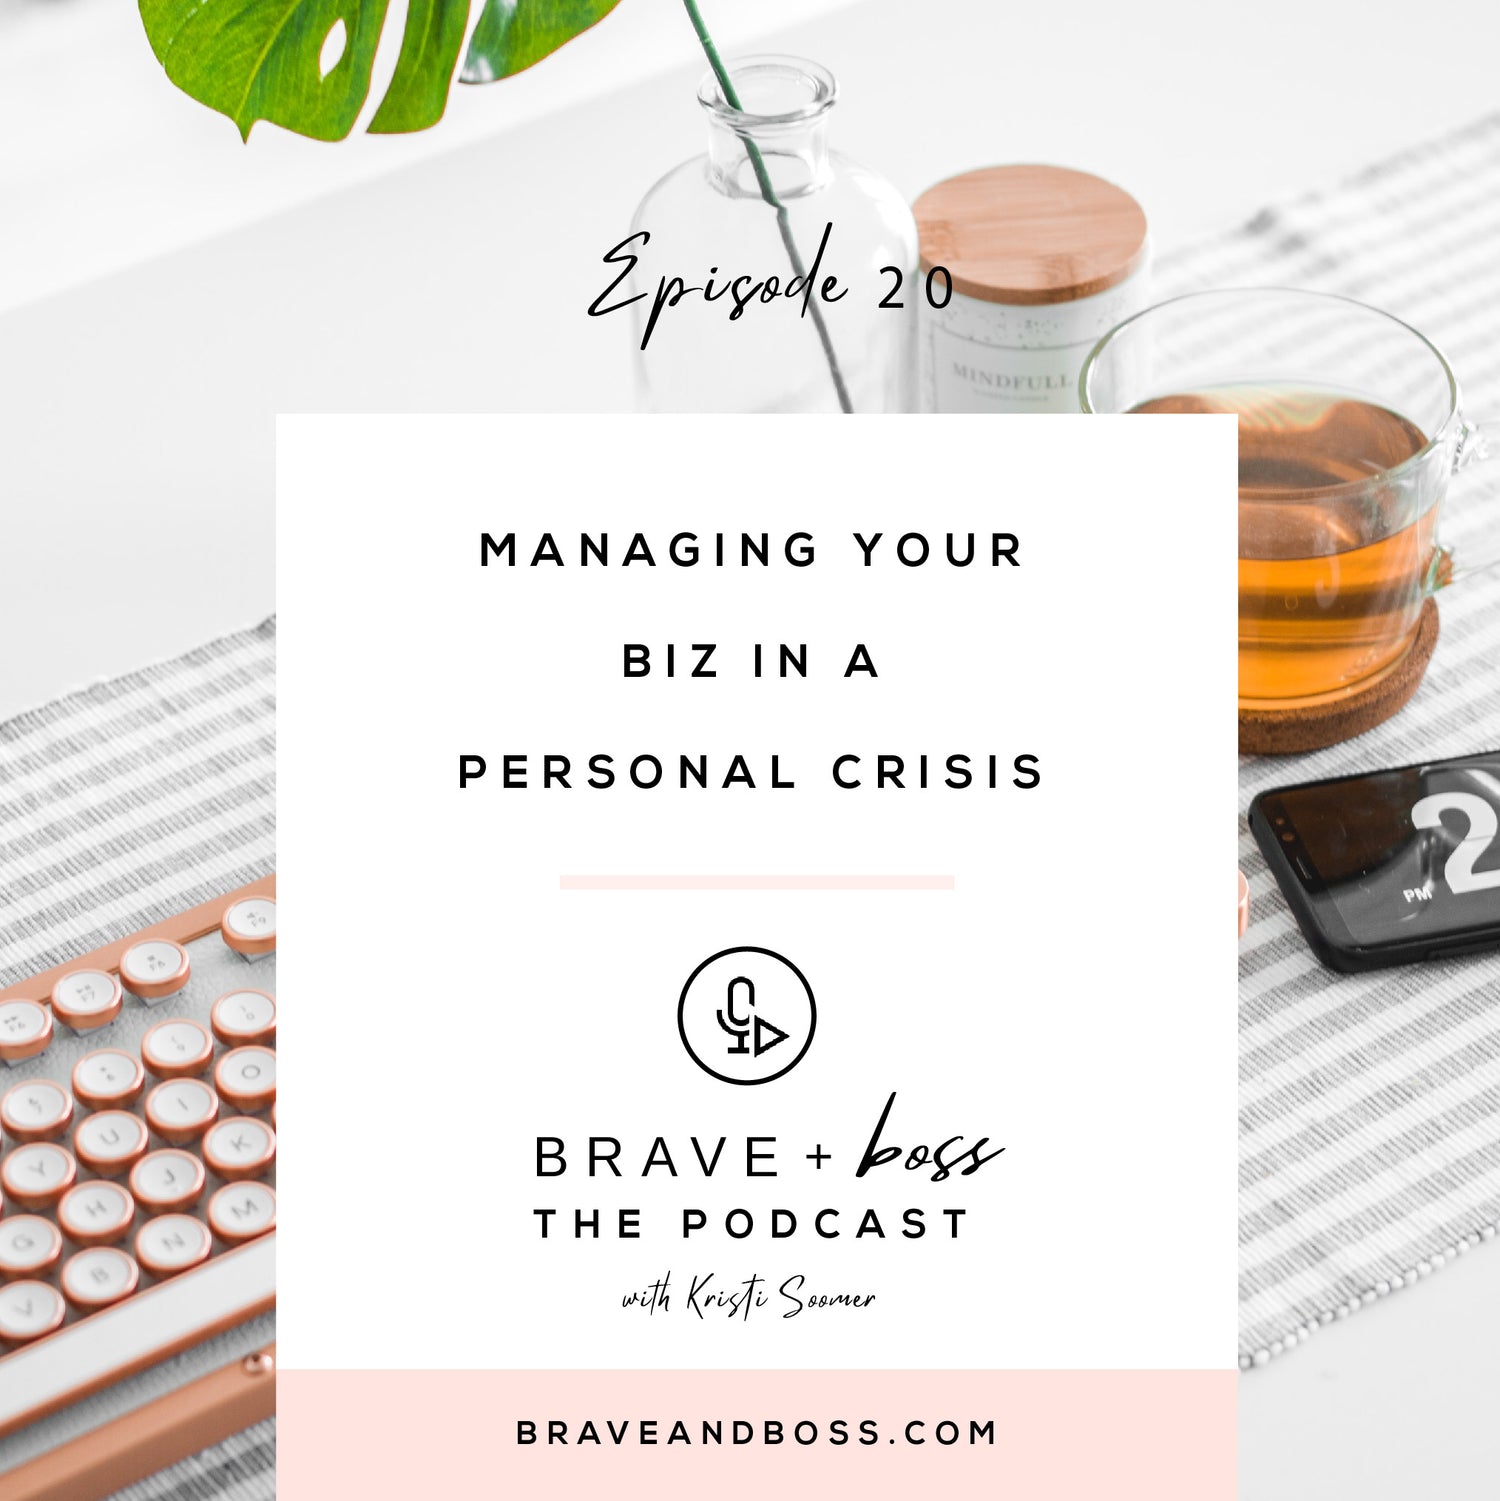 Managing your Biz in a Personal Crisis